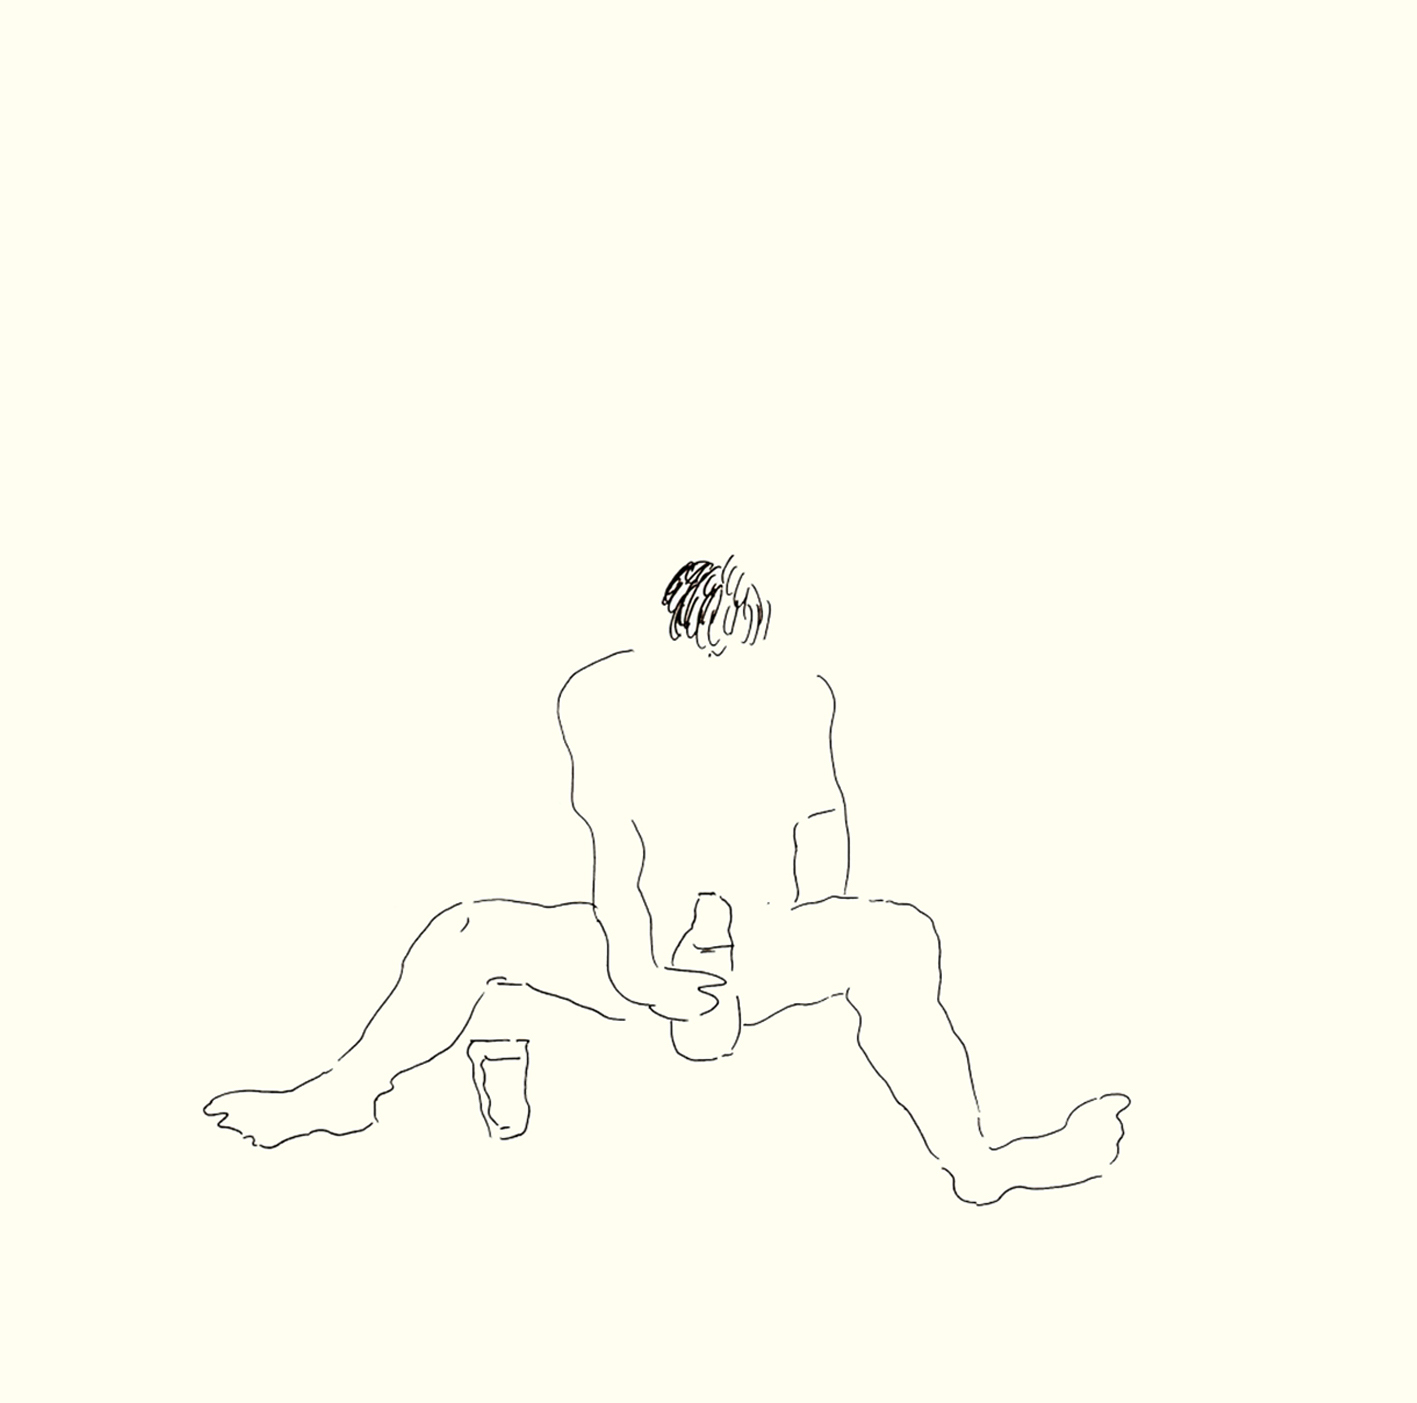 7. Figure sitting with legs apart, glass suggestively erect between their legs, figure holding glass